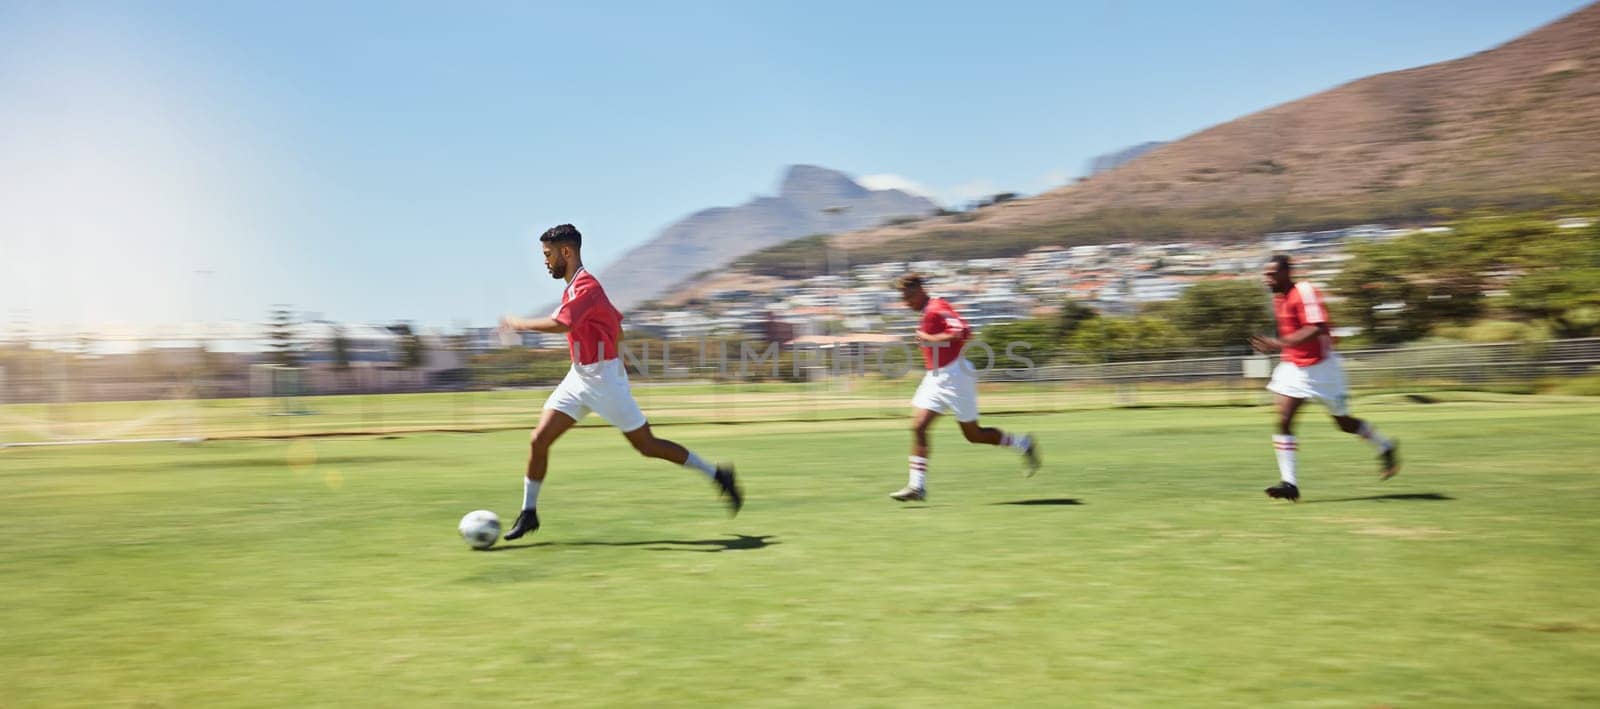 Soccer player, running and soccer ball team sports competition game, grass pitch and goals of winning score in South Africa. Motion blur professional athlete, football field action and outdoor energy.